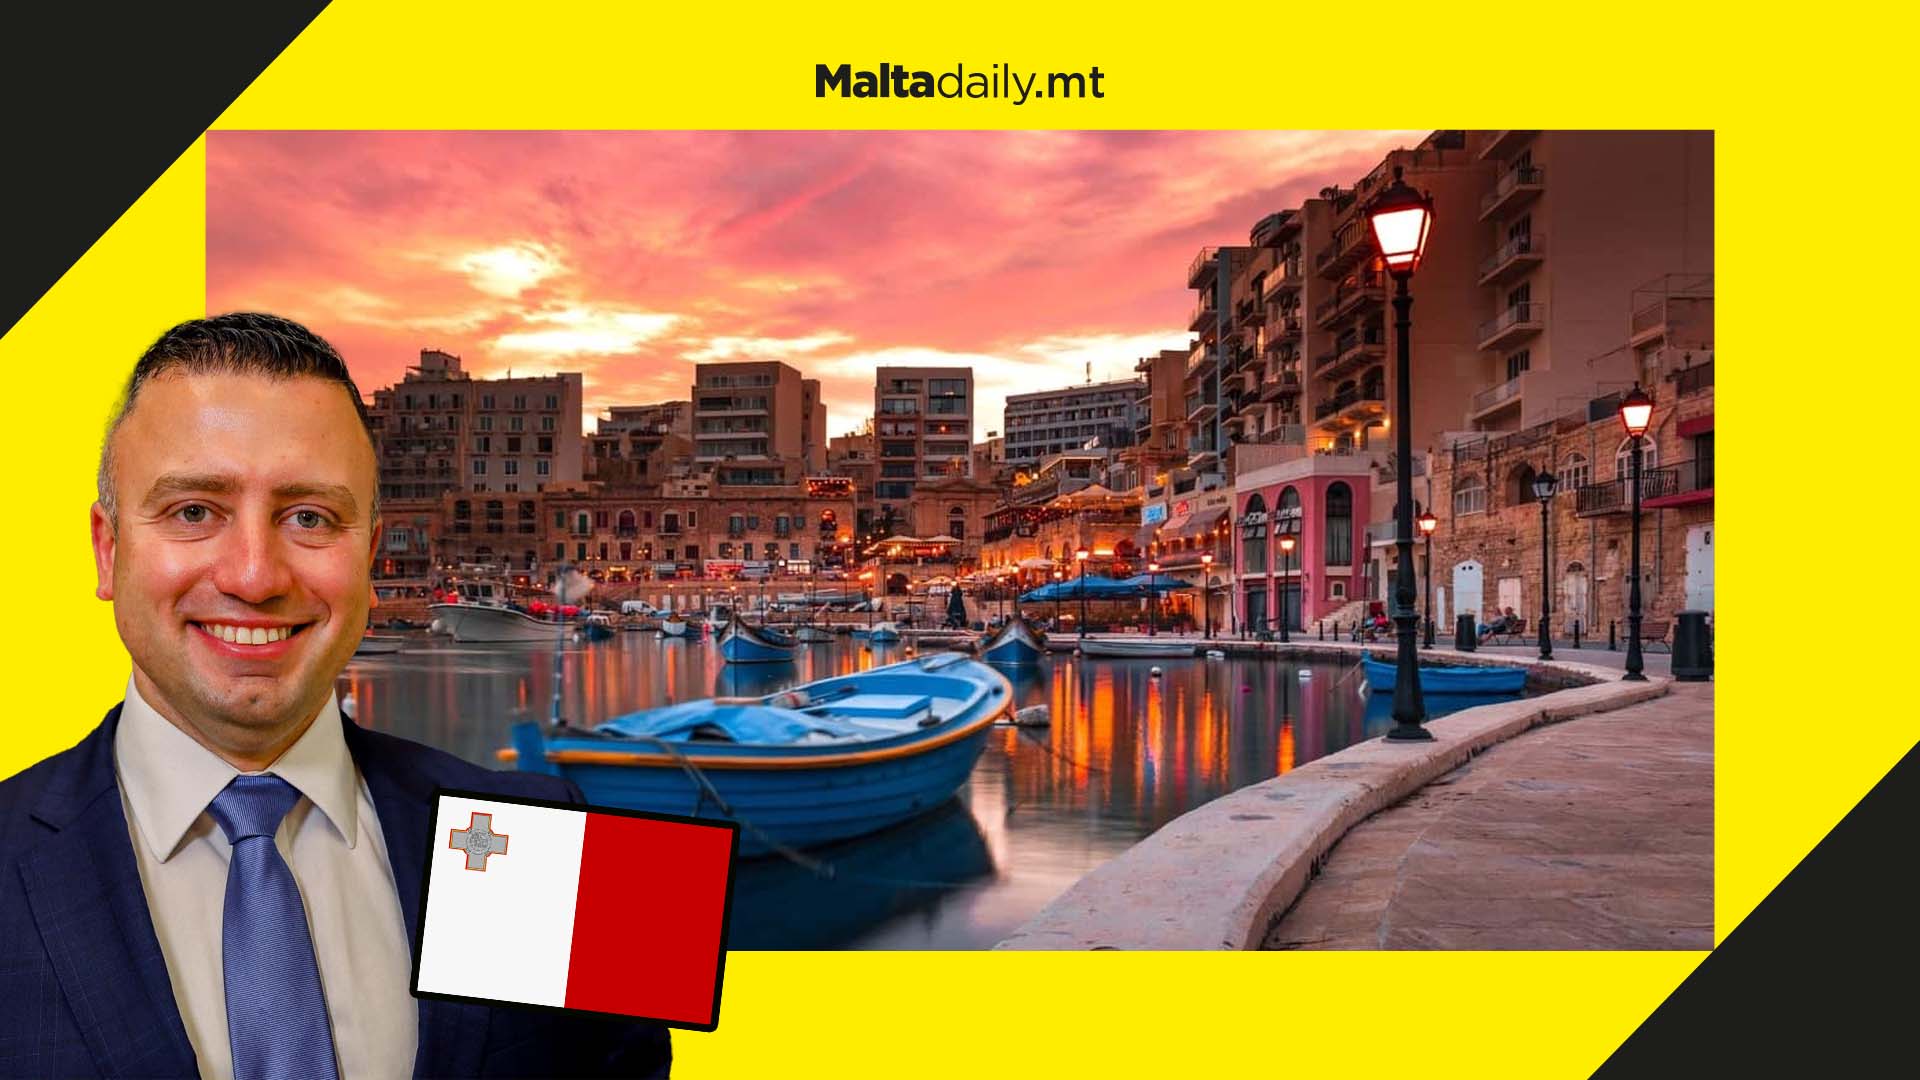 Malta will have welcomed 2.2 million tourists by end of 2022